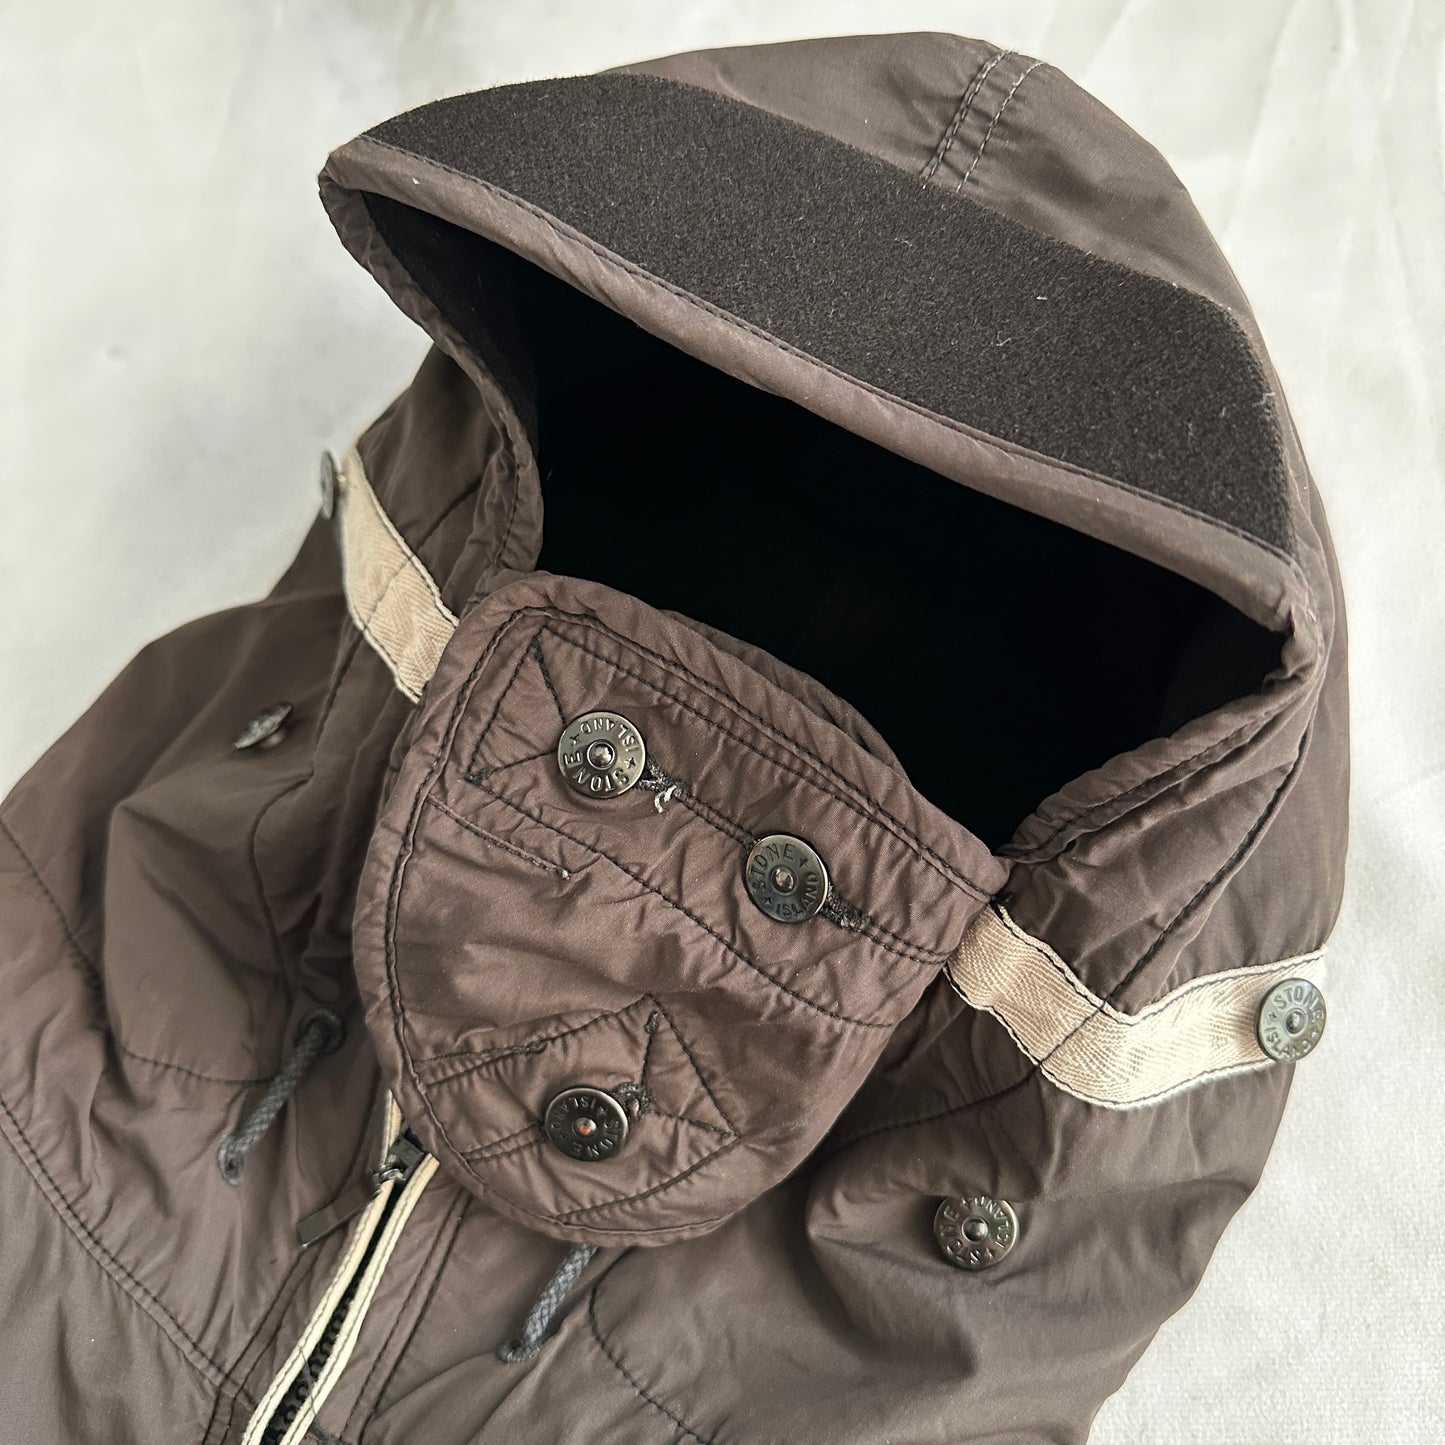 Stone Island 2006 Raso Floccato Riot Mask Jacket - 3XL - Made in Italy